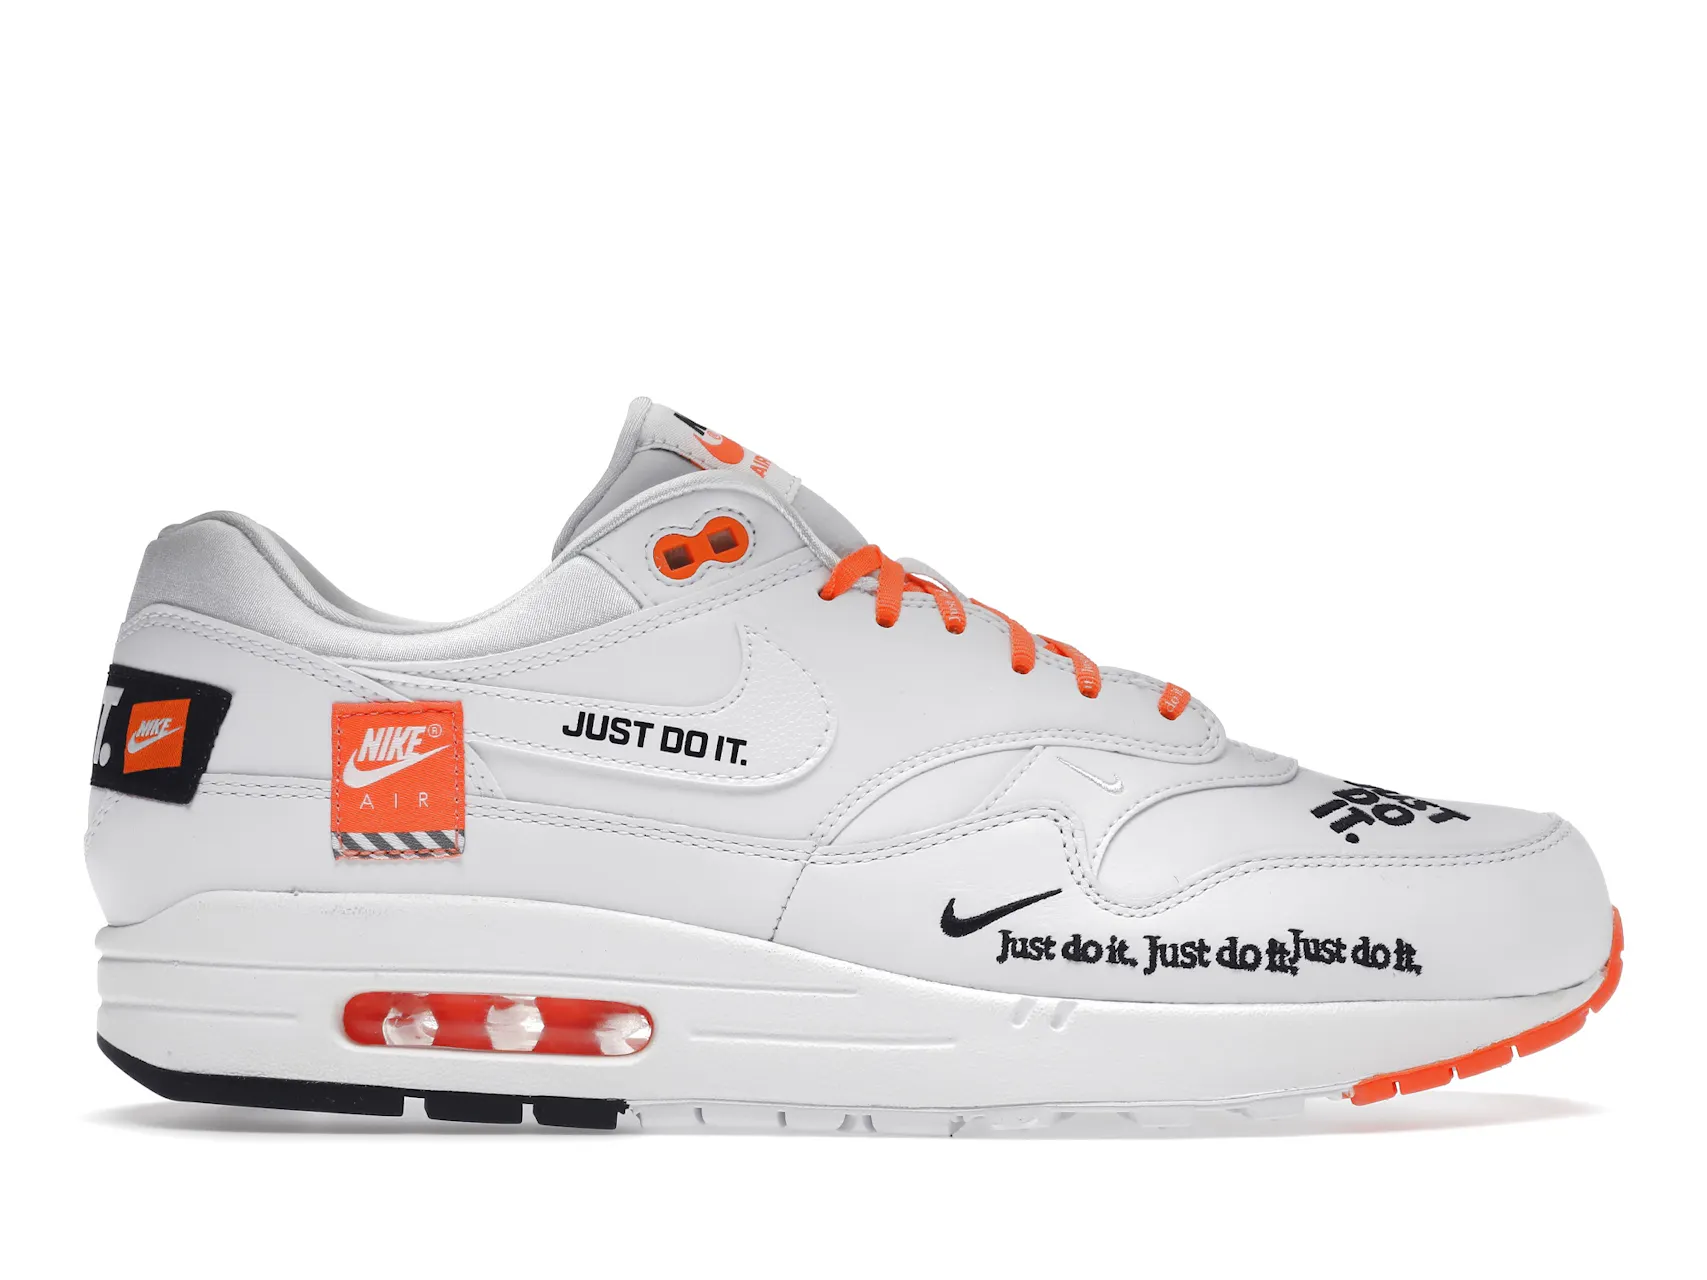 Nike Air Max 1 Just Do It Pack White - AO1021-100